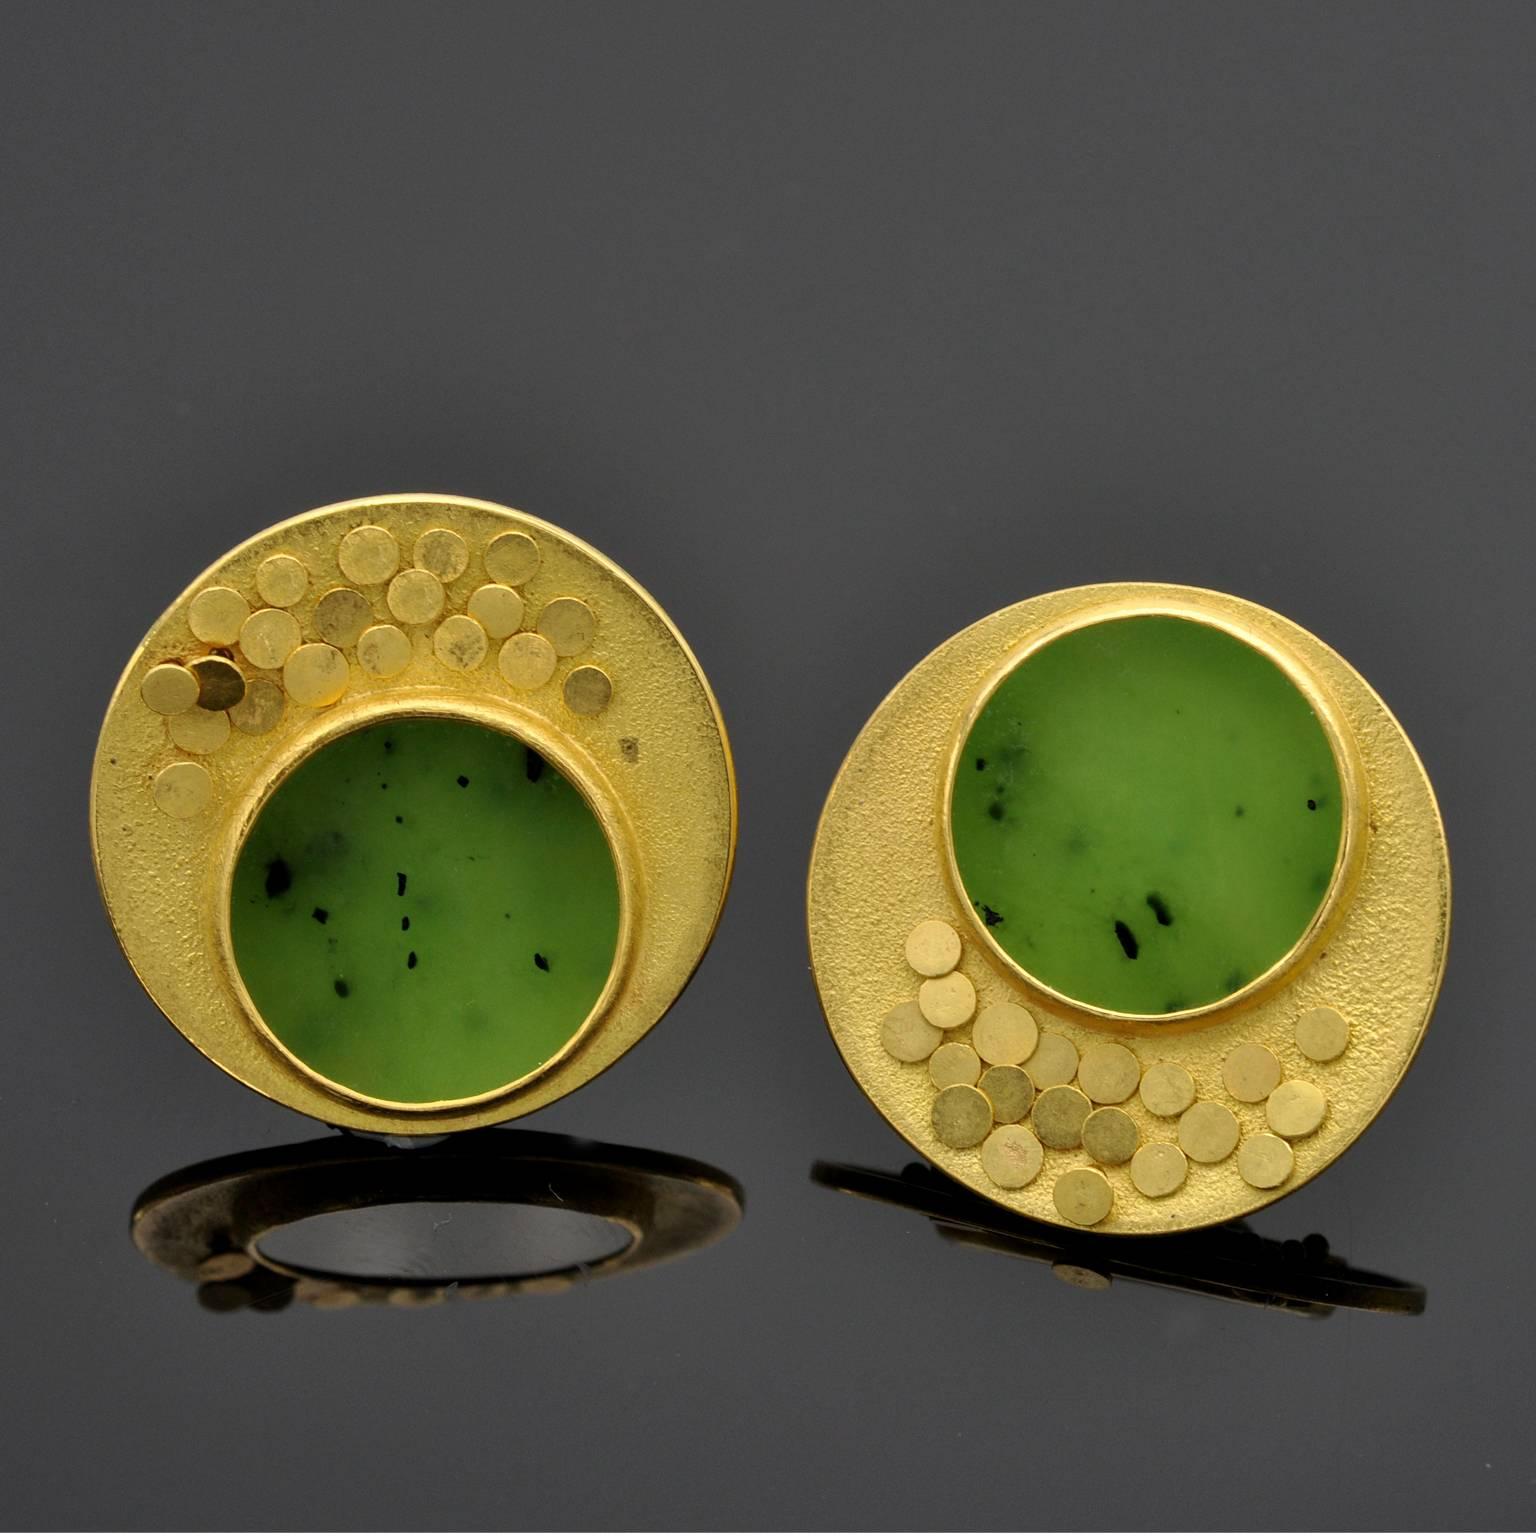  Modern earrings with ethnic influences make it a timeless piece one would wear   with pleasure in many occasions. A round green jade set in textured gold with twenty scale like moving disks.  

Michael Zobel is considered one of the most